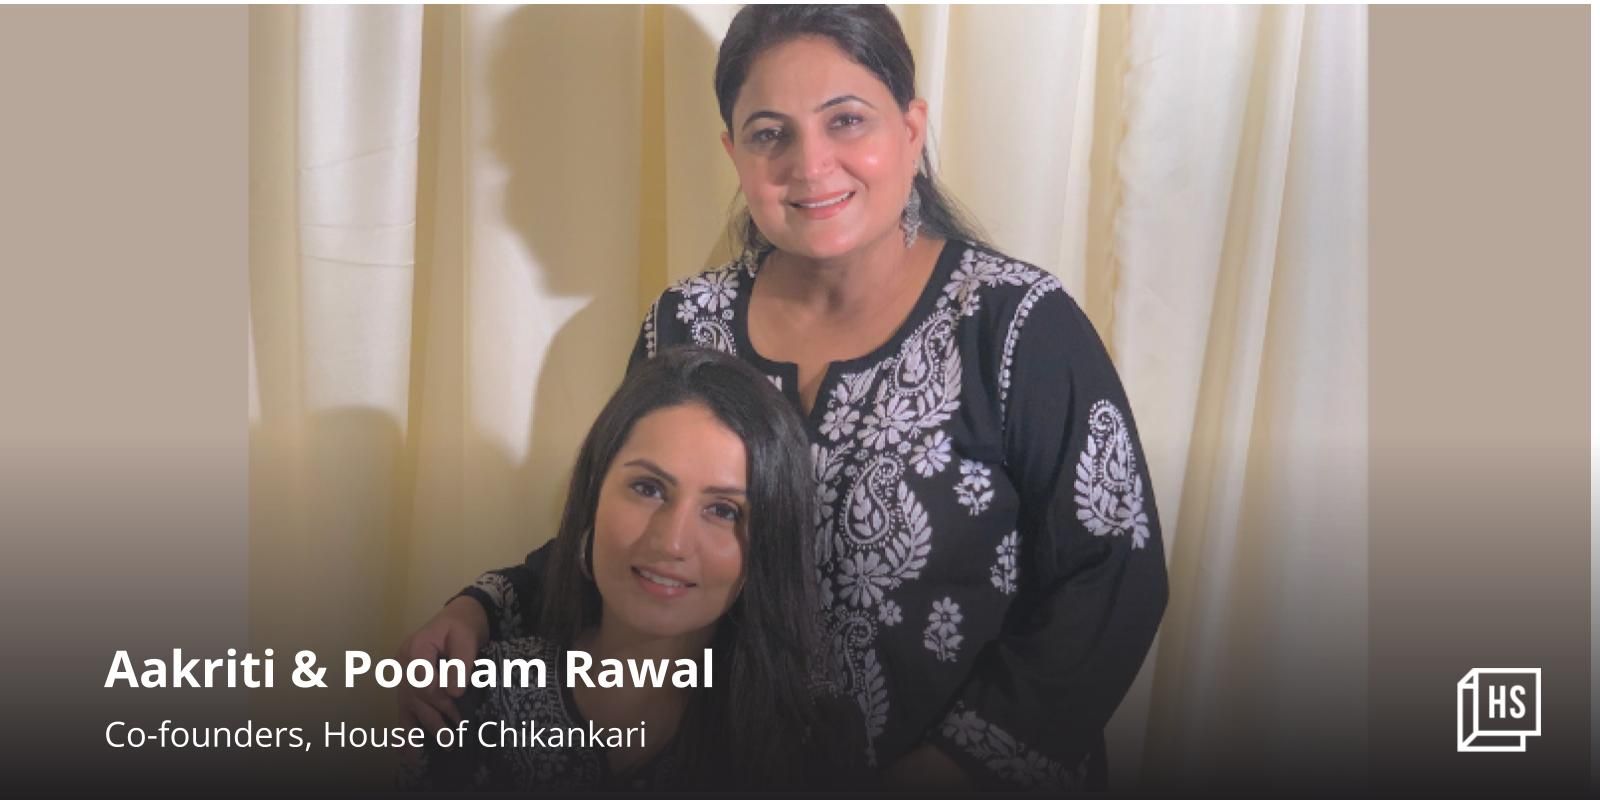 This mother-daughter’s chikankari venture bagged Rs 75 lakh funding on Shark Tank India

